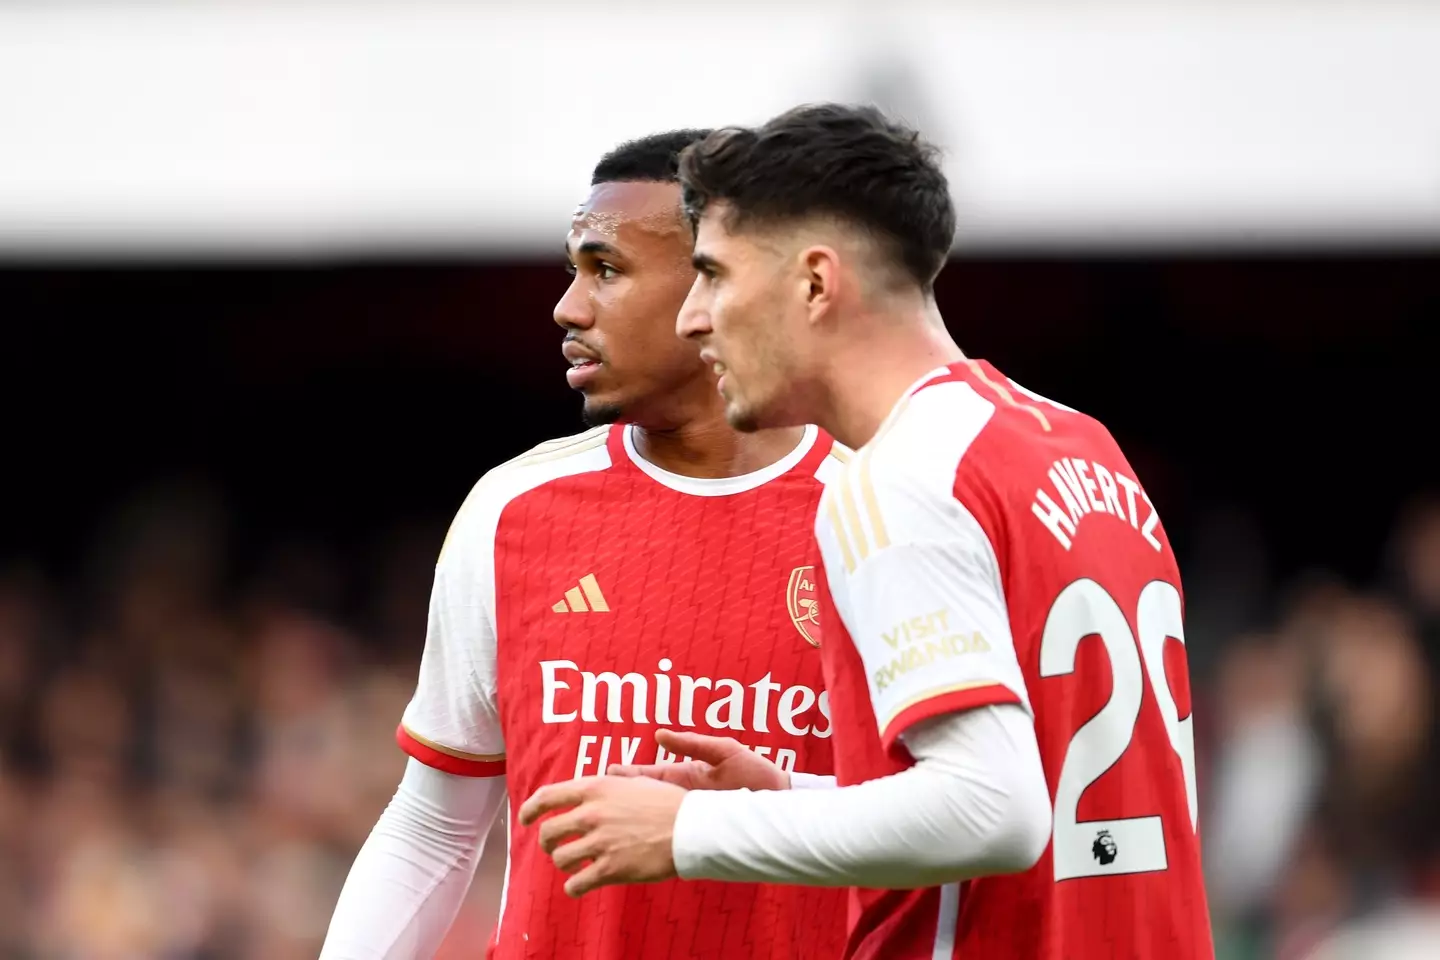 Gabriel was angry at Havertz during Arsenal's game against Wolves (Getty)